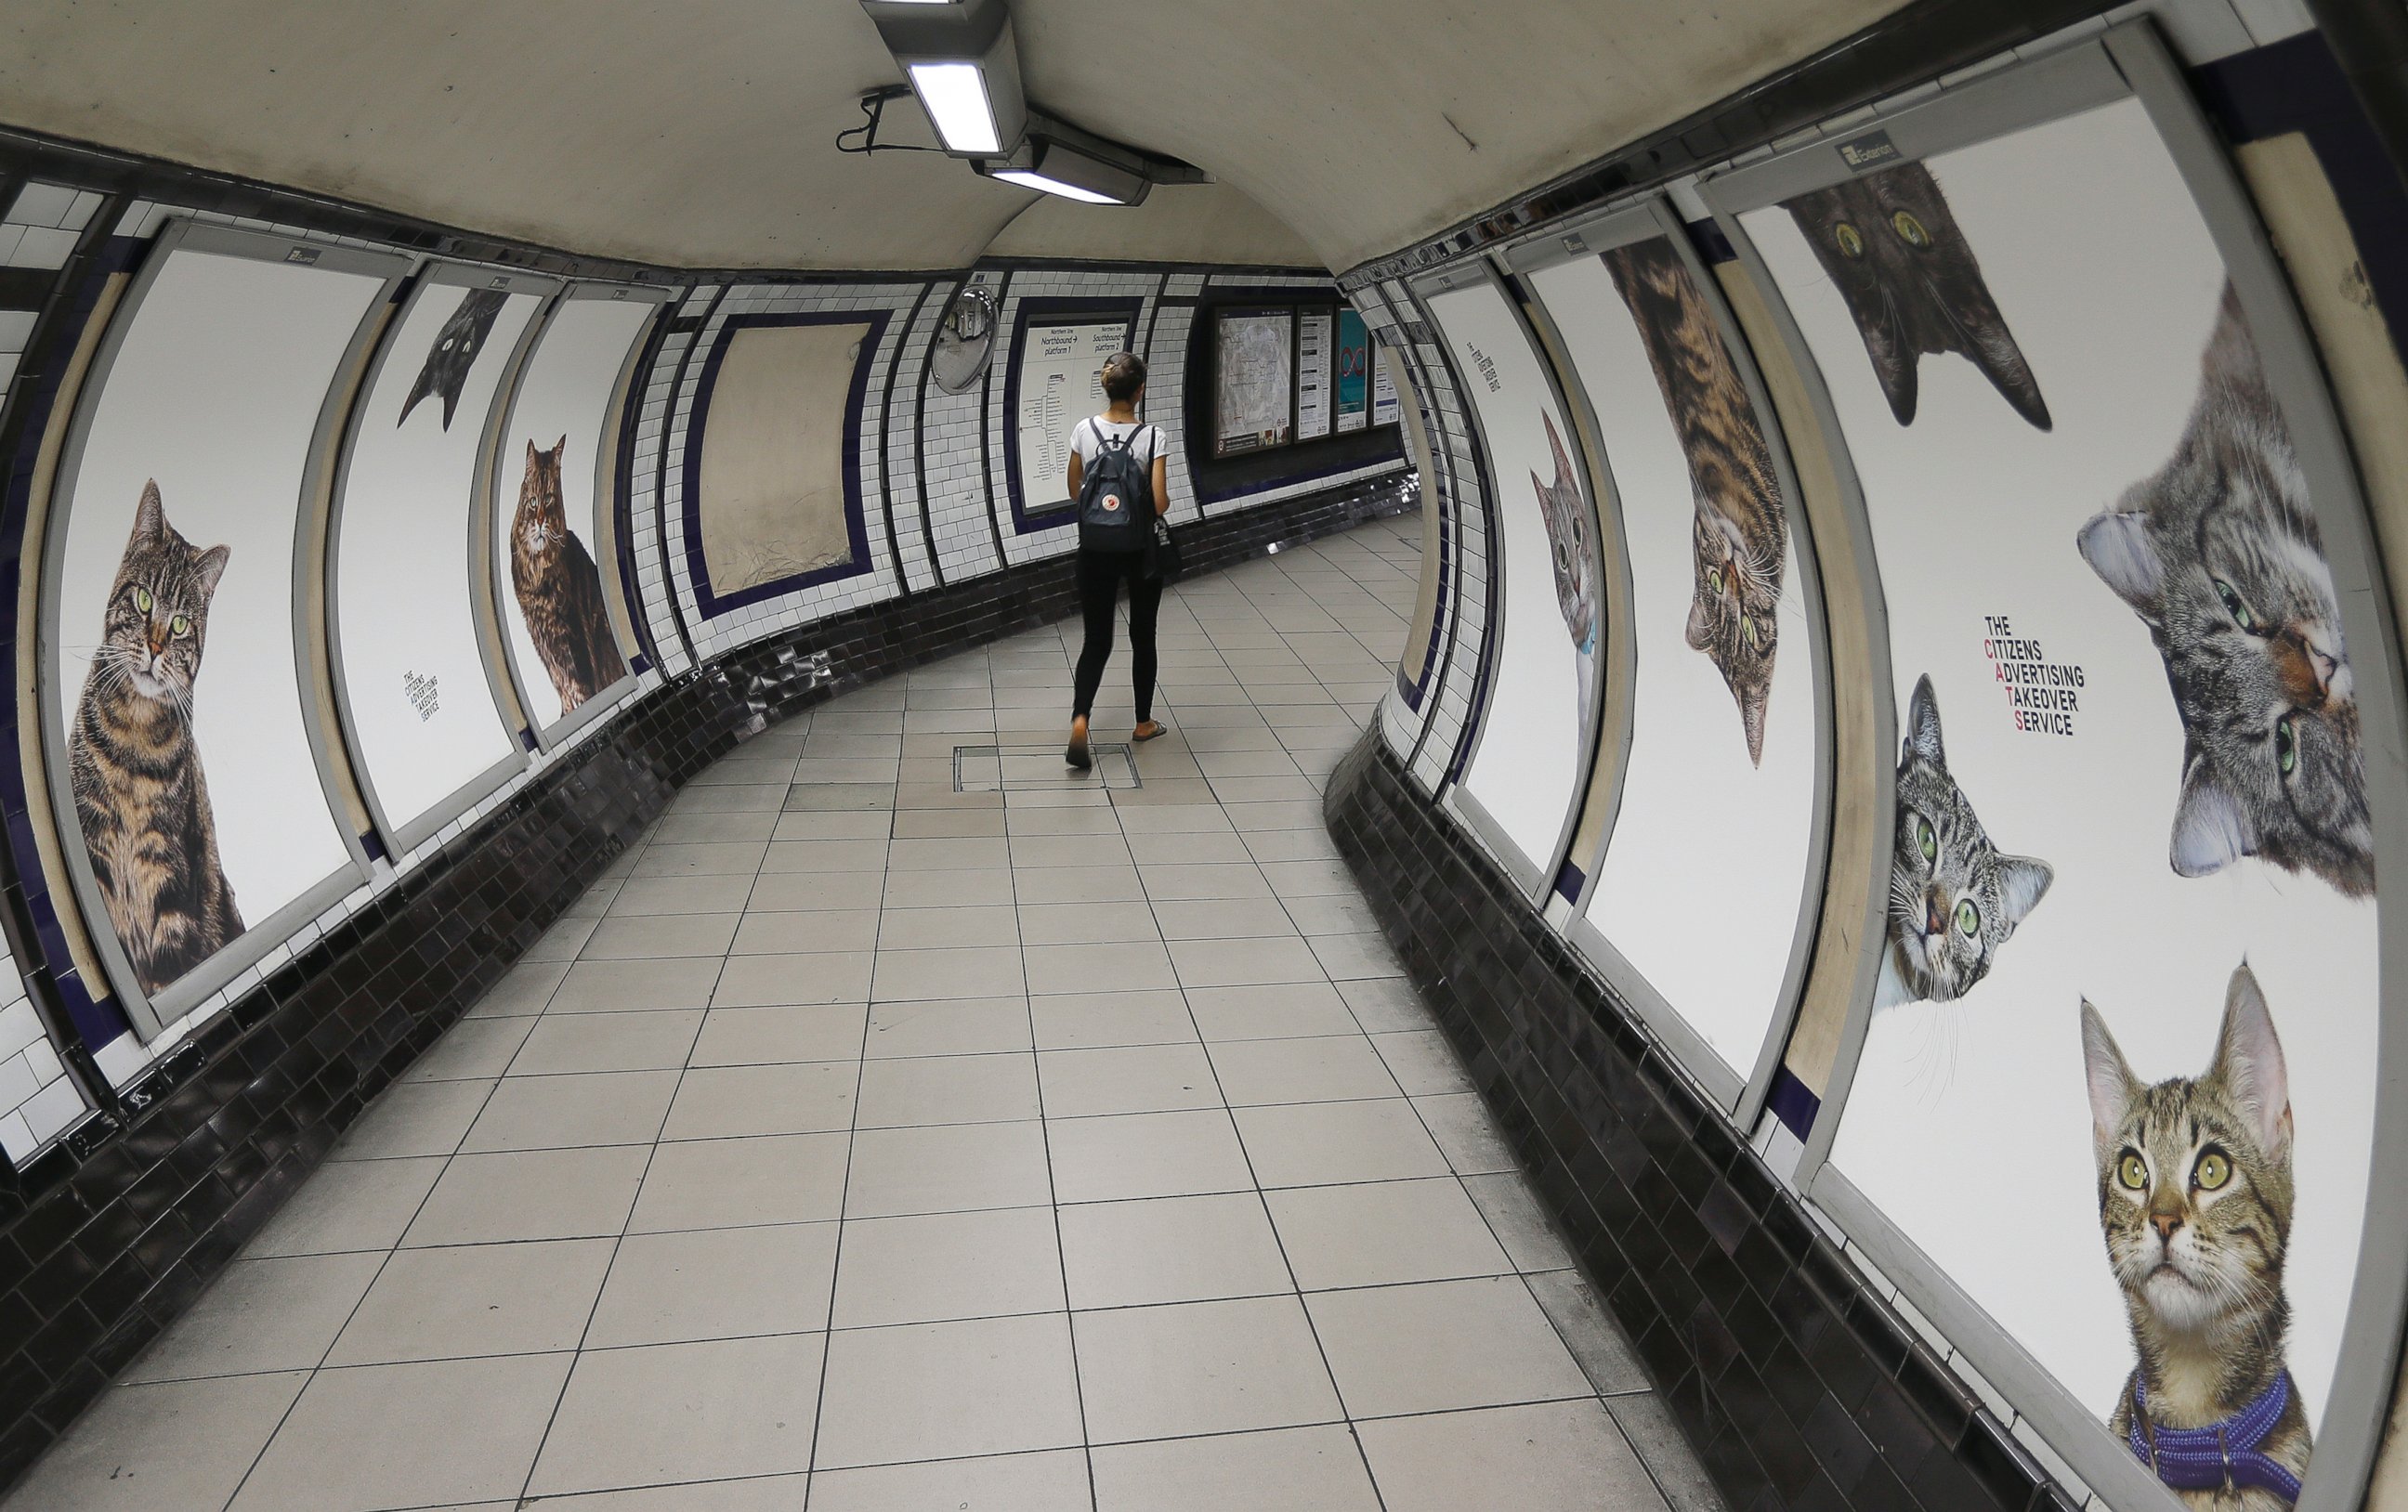 PHOTO: Posters featuring cats, on display, at the Clapham Common Tube station in London, Sept. 13, 2016.